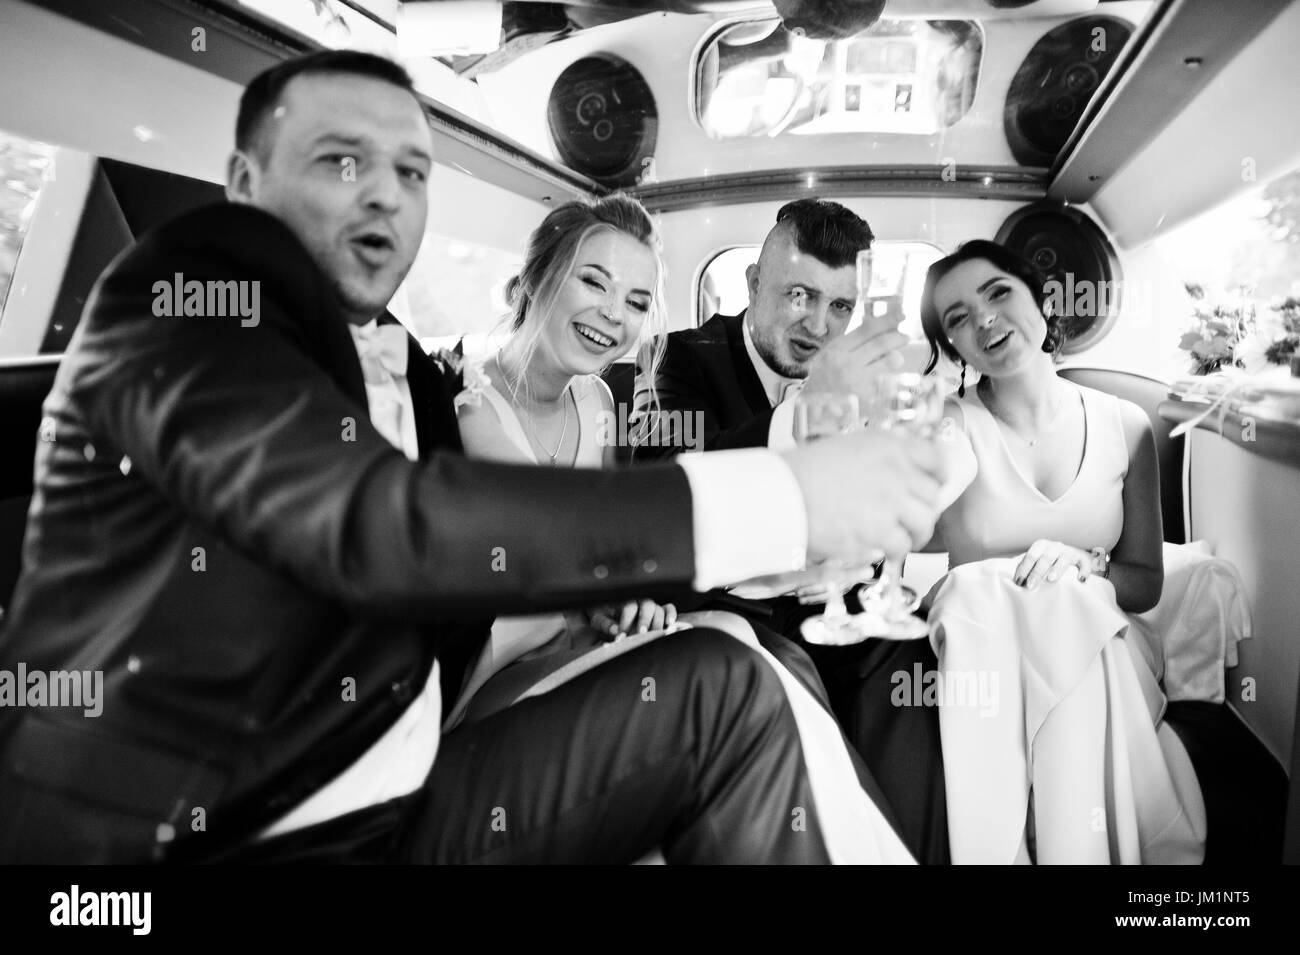 Groomsmen and bridesmaids drinking champagne in the limo. Black and white photo. Stock Photo